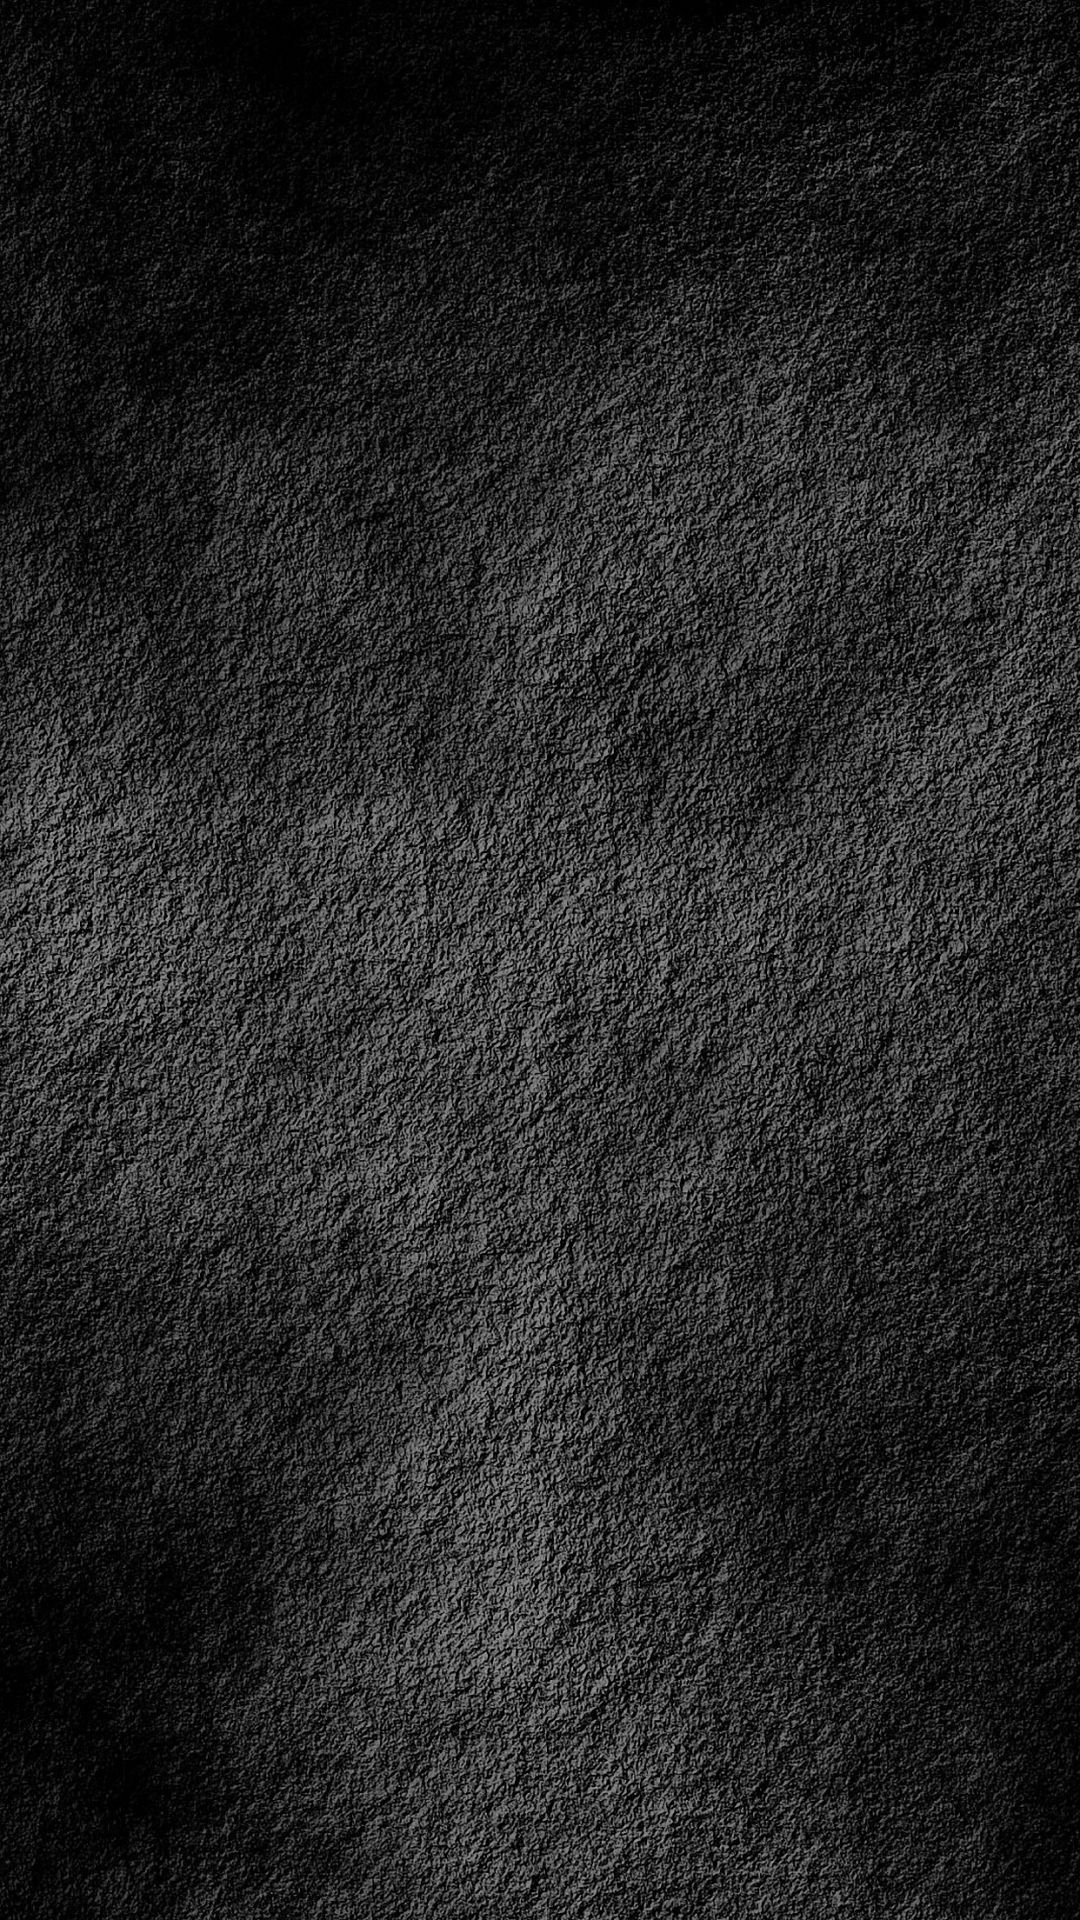 Black and Grey iPhone Wallpapers Top 25 Best Black and Grey iPhone  Wallpapers  Getty Wallpapers